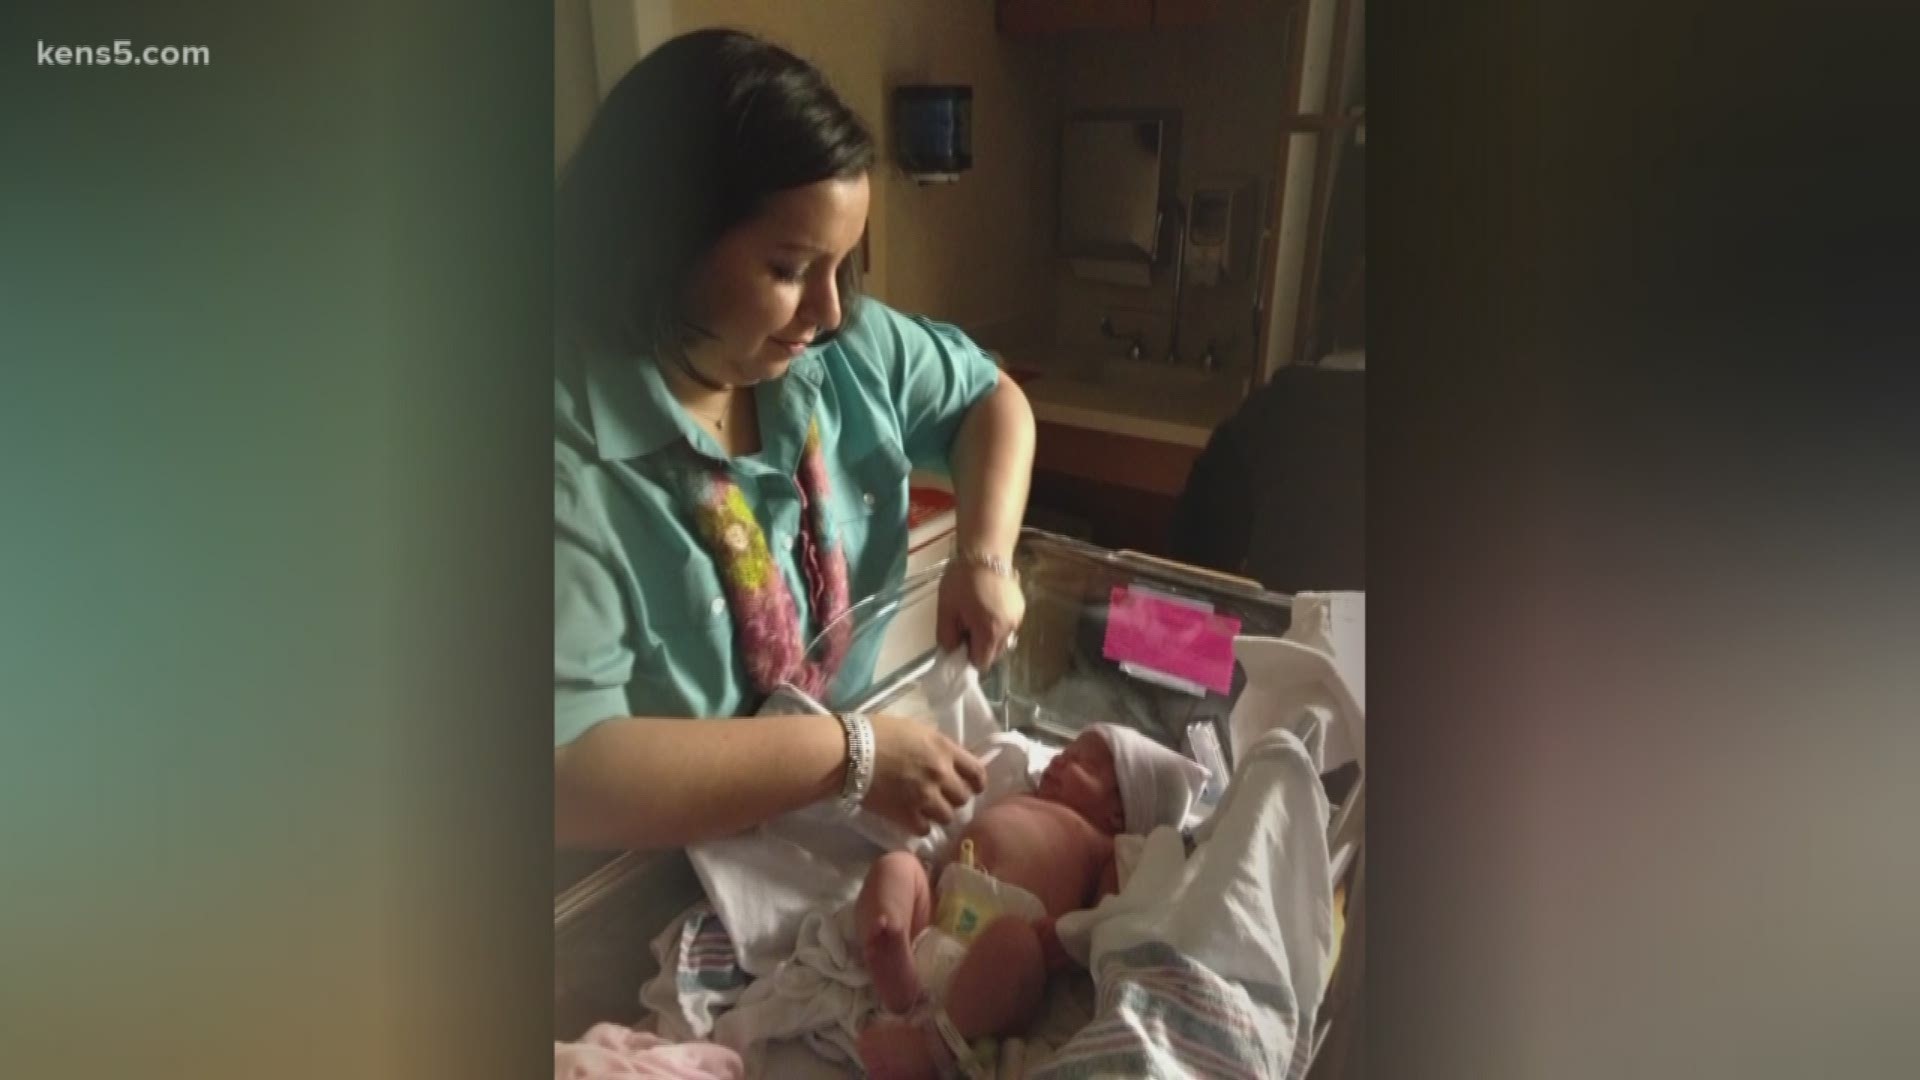 After nearly a decade of trying to conceive a baby, KENS 5's sales account manager decided to go the adoption route. But their journey wouldn't end there.